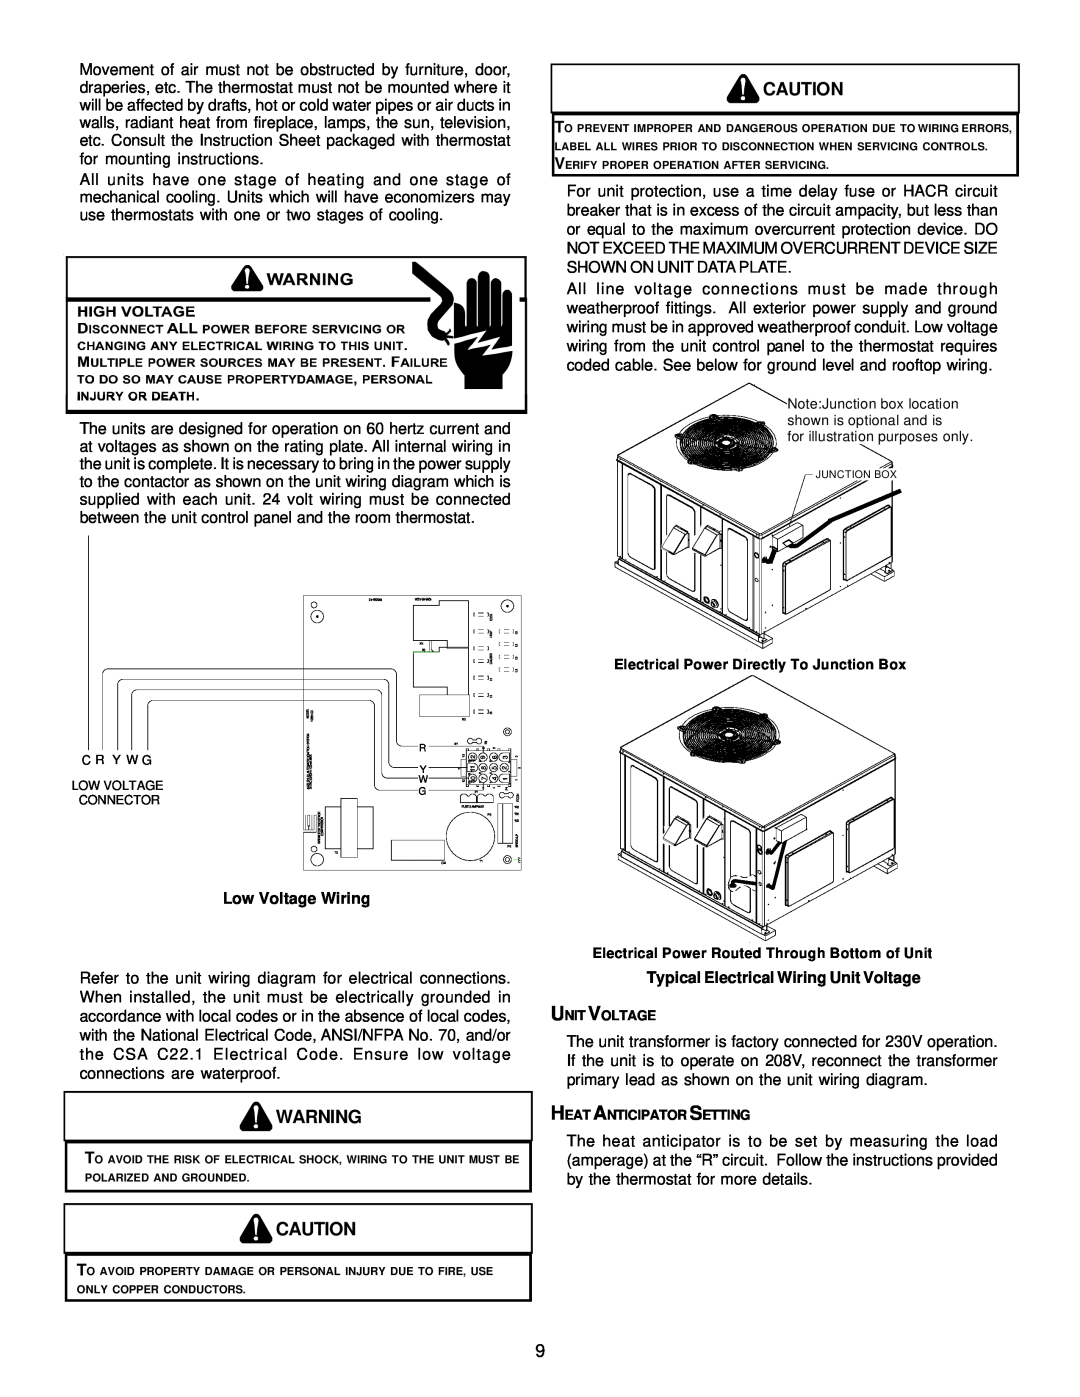 Goodman Mfg A/GPG13 M operating instructions Low Voltage Wiring, Typical Electrical Wiring Unit Voltage 